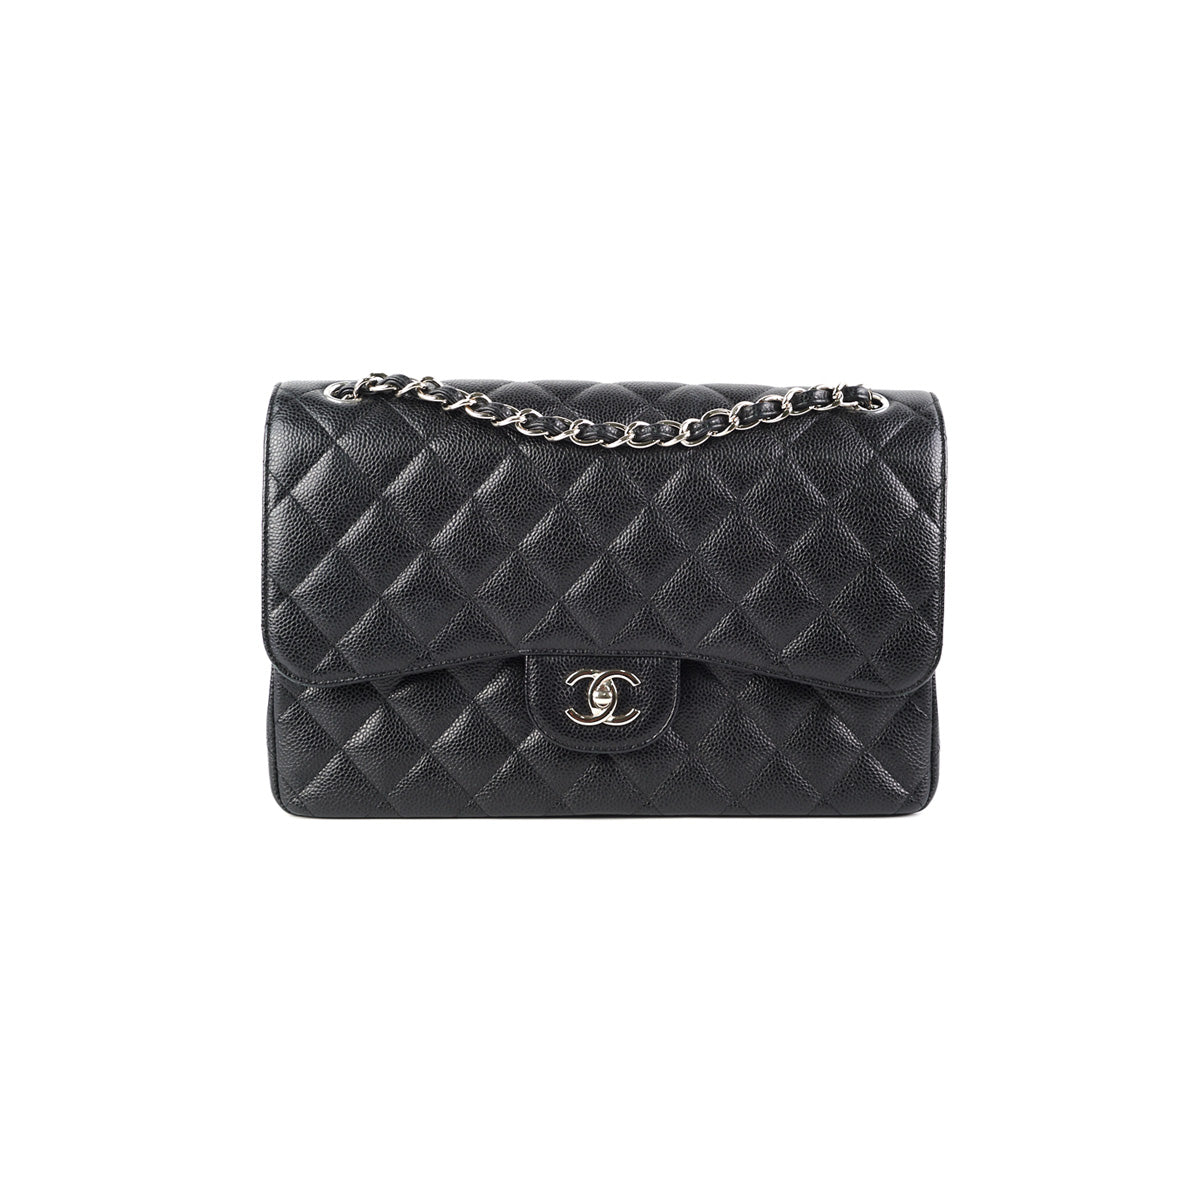 100 AUTHENTIC CHANEL SO BLACK CLASSIC FLAP MINI WALLET CARD HOLDER WITH  CHAIN  eBay